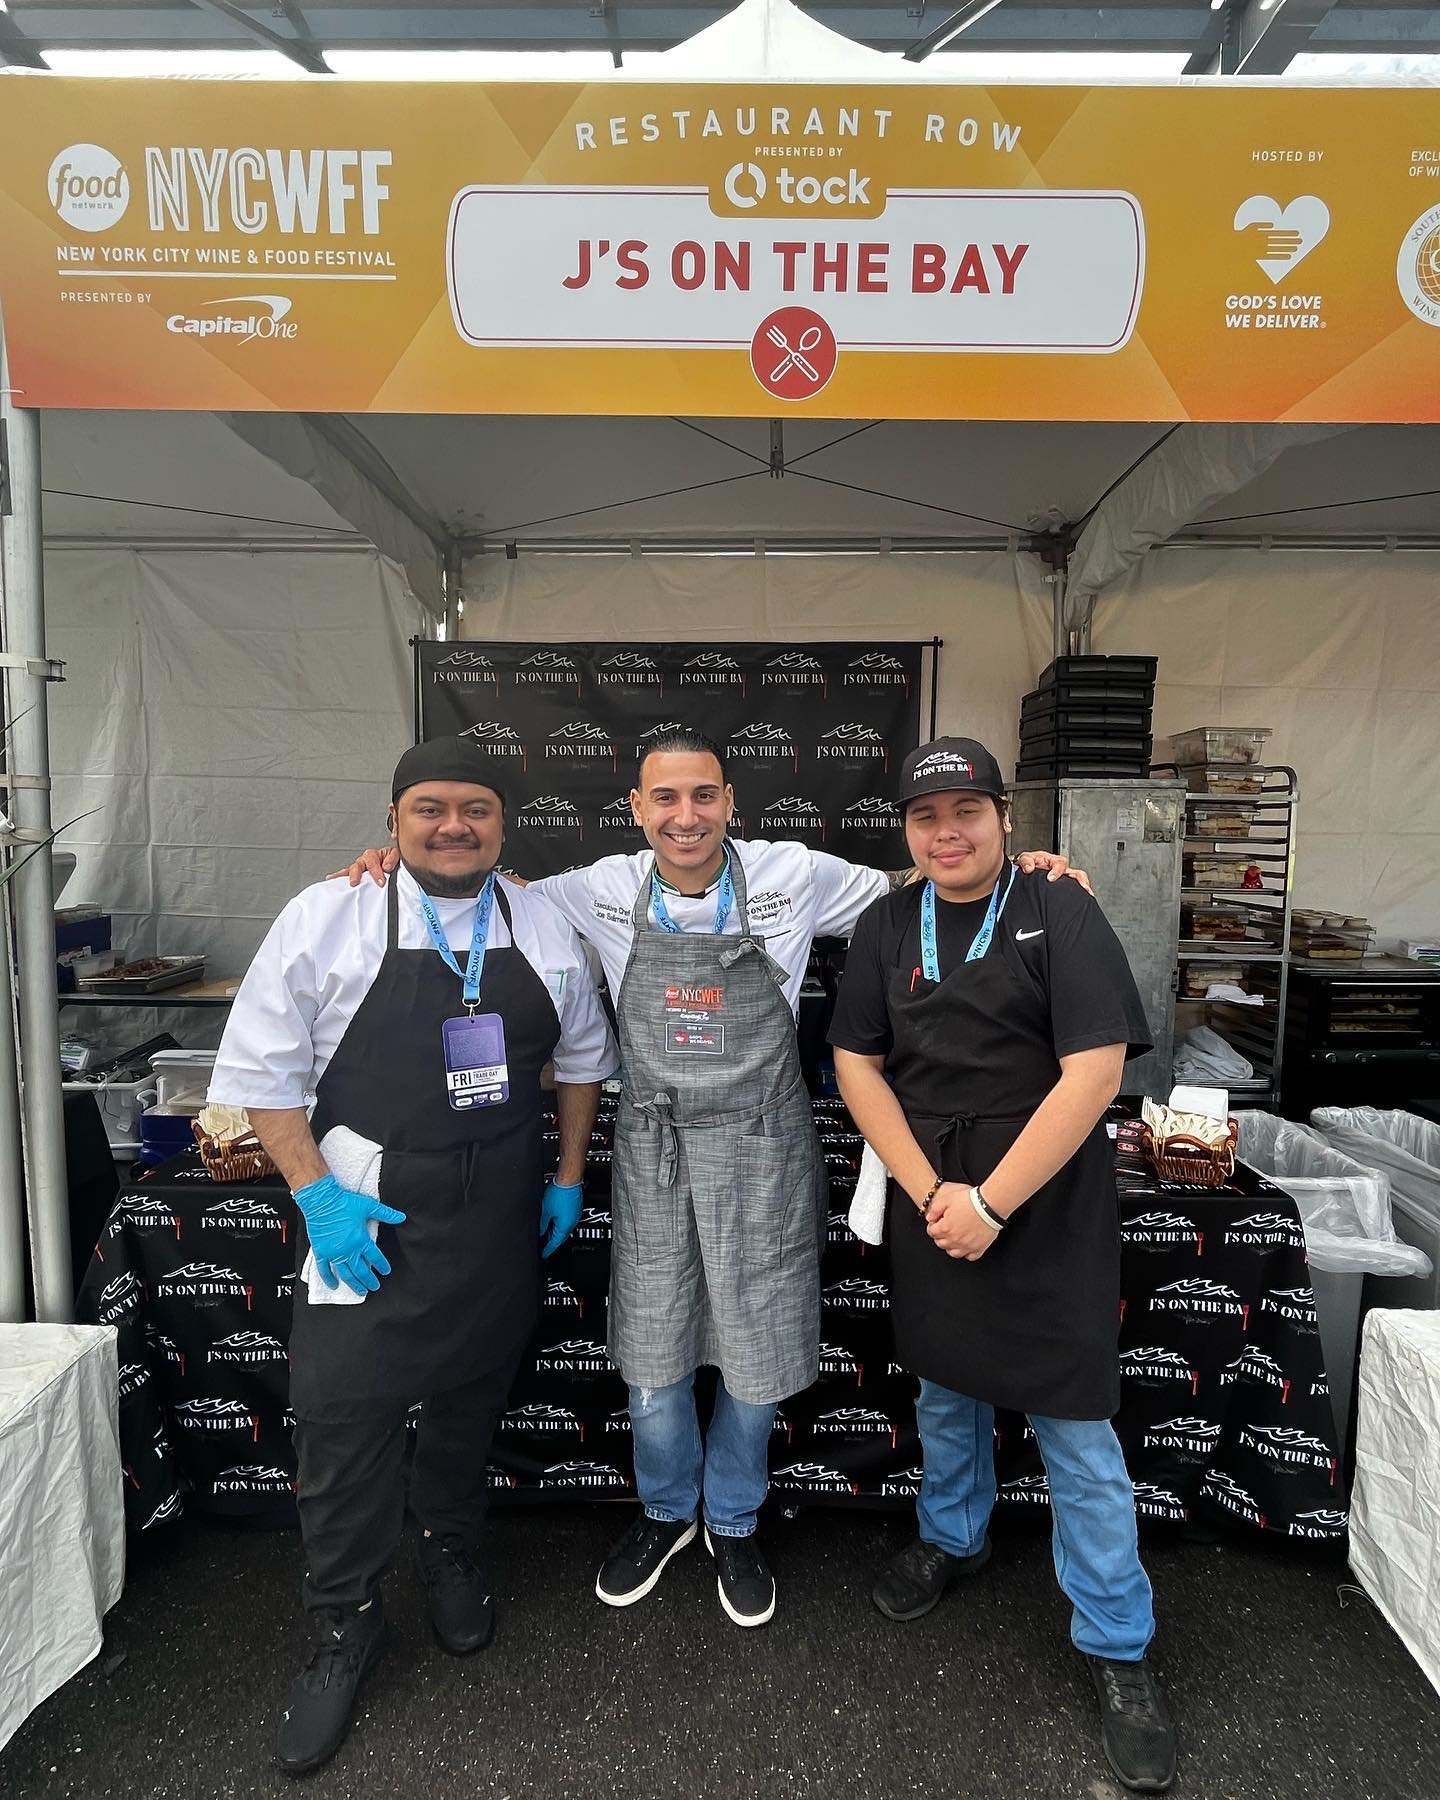 We are so excited that J&rsquo;s On The Bay is participating in this year's @nycwff Food Network New York City Wine &amp; Food  Festival. The proceeds from all of the events this weekend go to @godslovenyc God's love We Deliver NYC;  an organization 